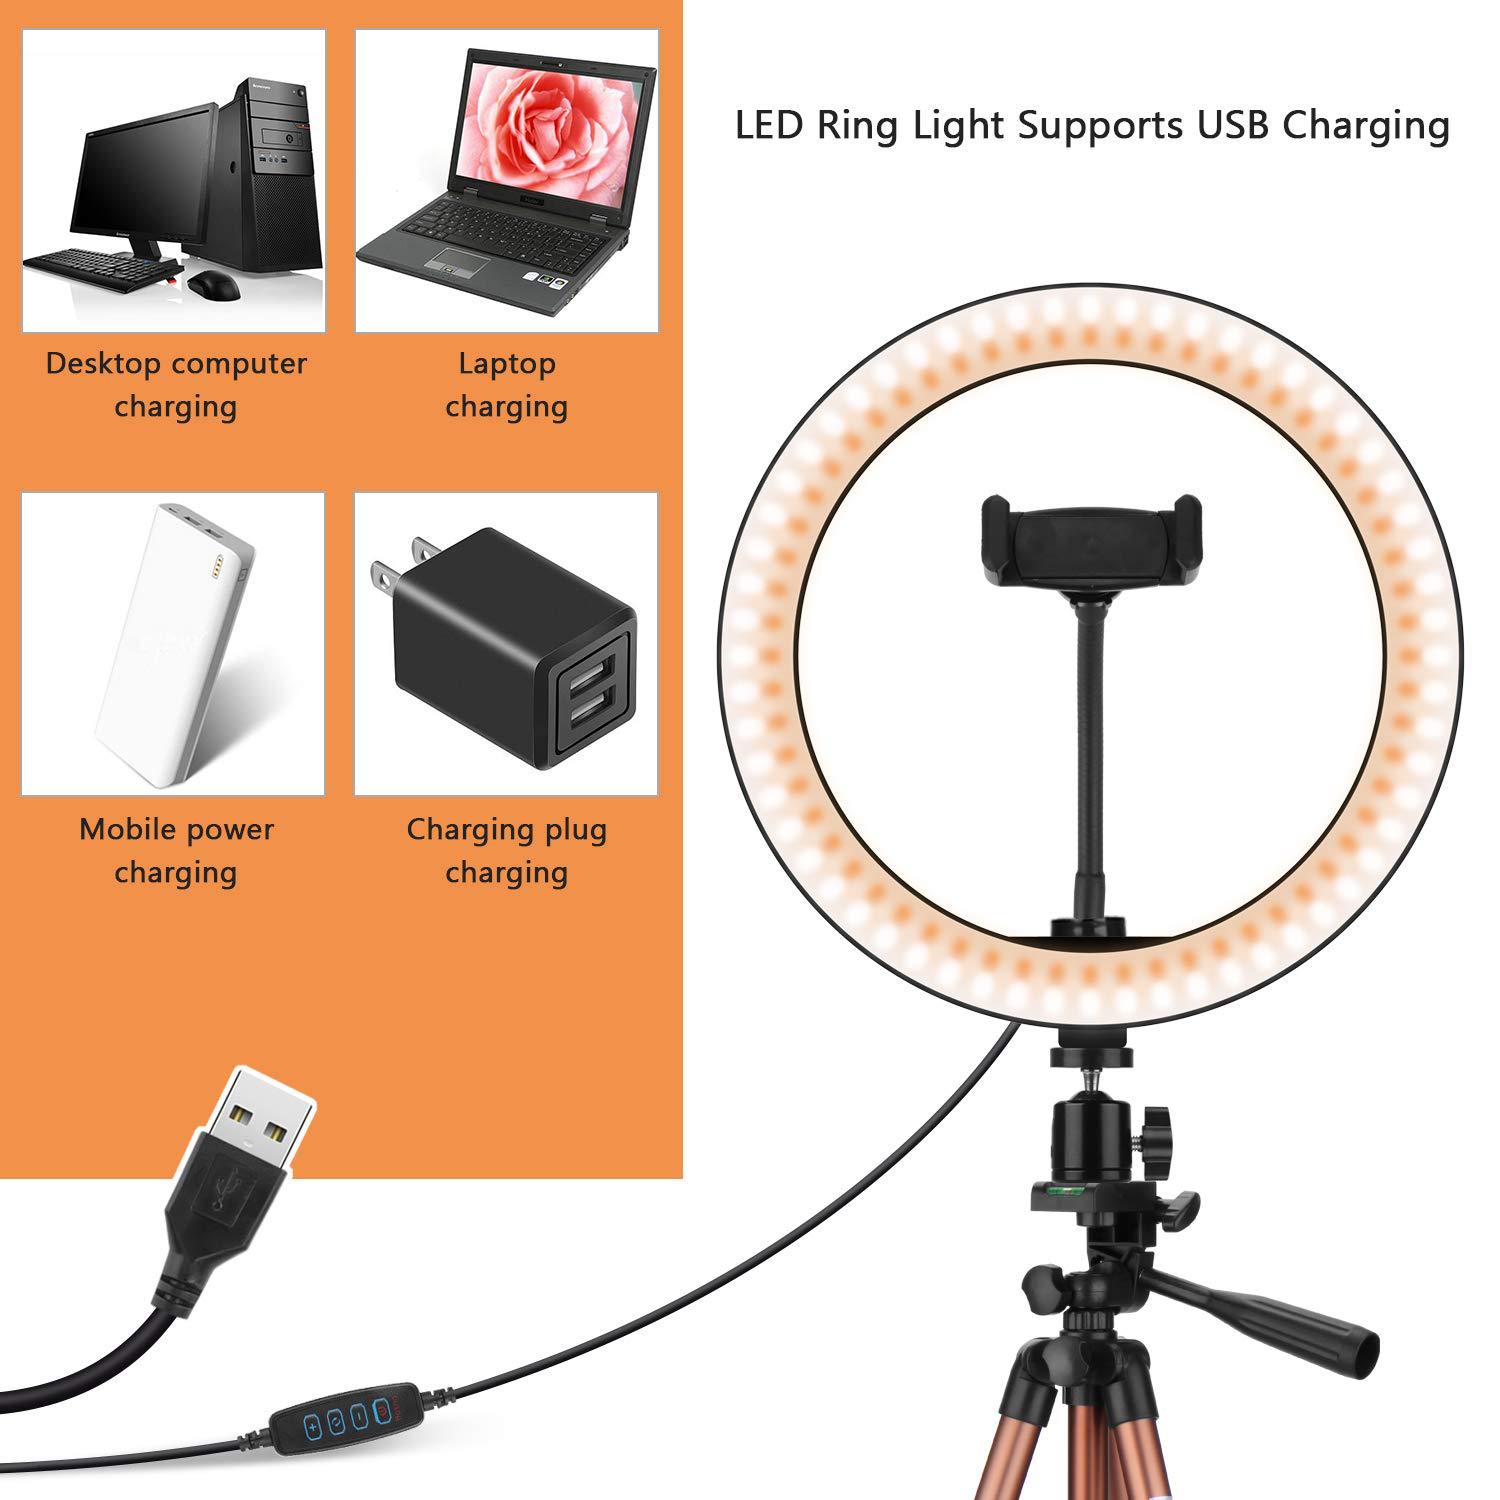 Bakeey-Fill-Light-Tripod-Photography-LED-Selfie-Ring-Light-Remote-Control-Ring-Lamp-For-Makeup-Video-1760944-7